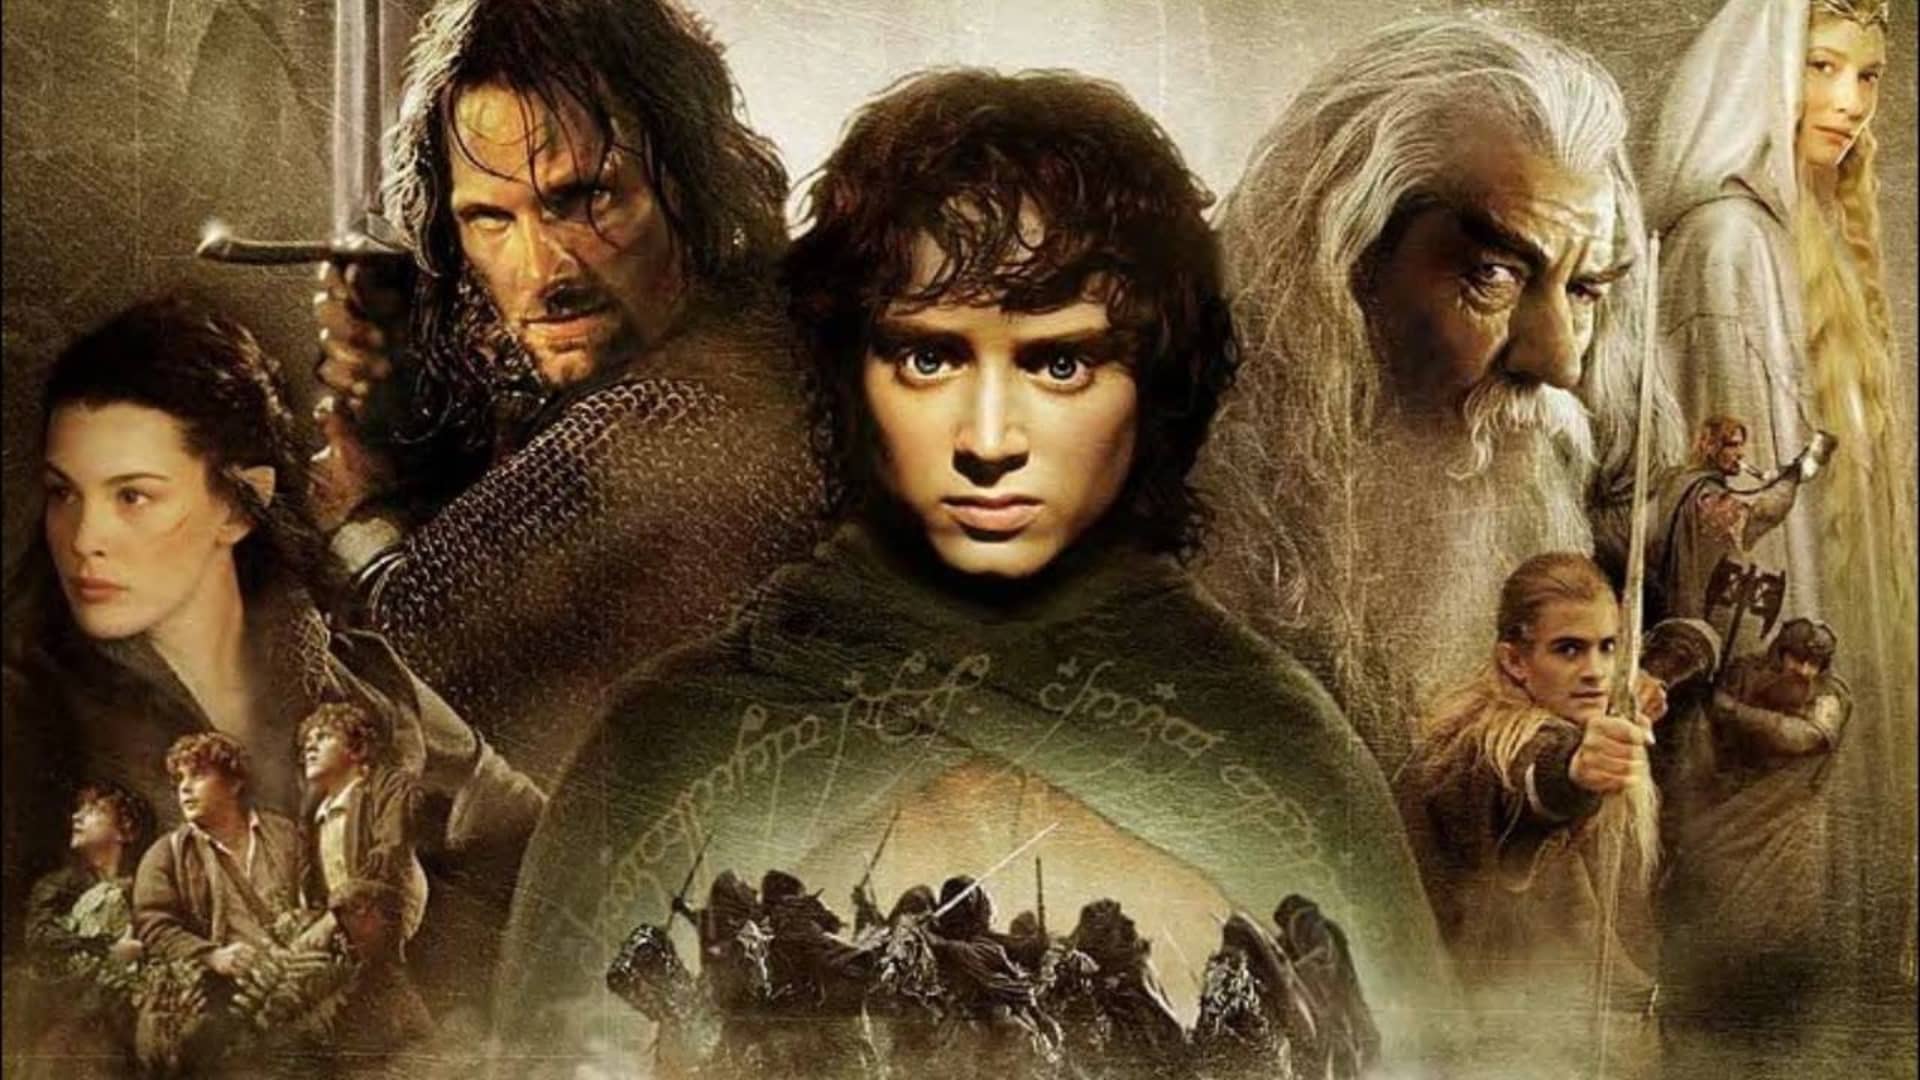 Embracer Group buys rights to 'Lord of the Rings' films, other Tolkien intellectual property